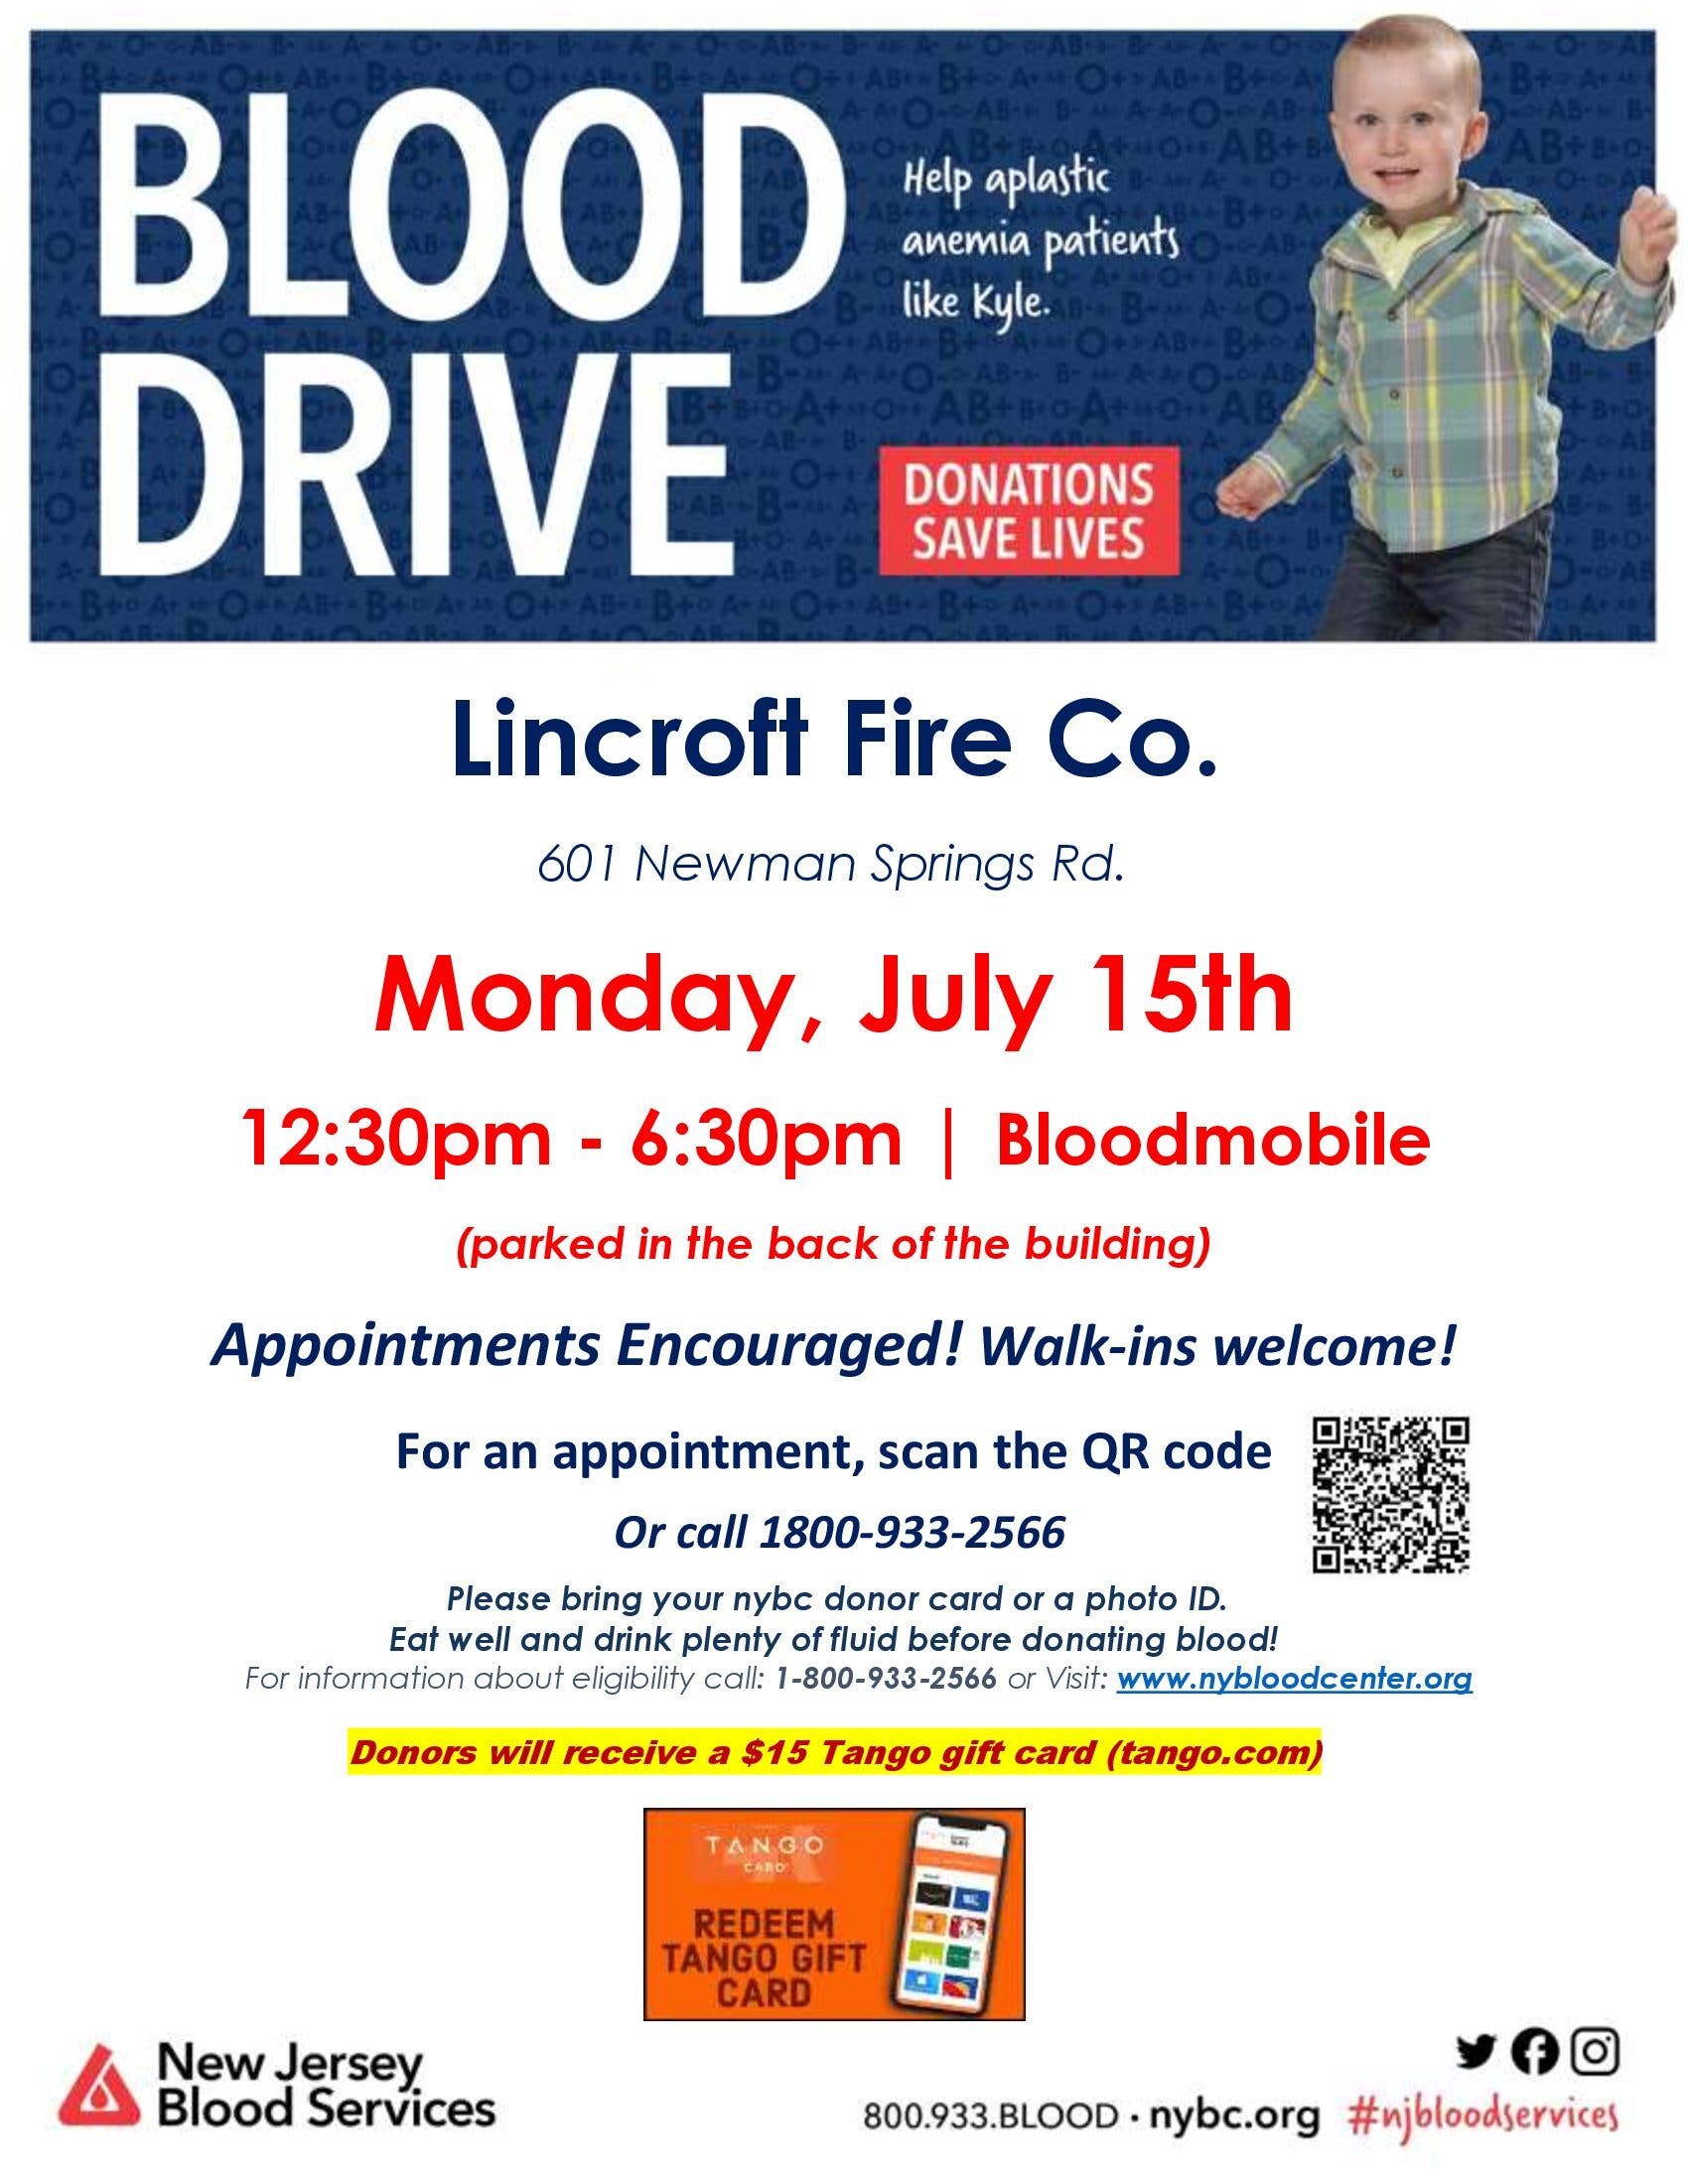 Lincroft Community Blood Drive - $15 E-gift card for donors!